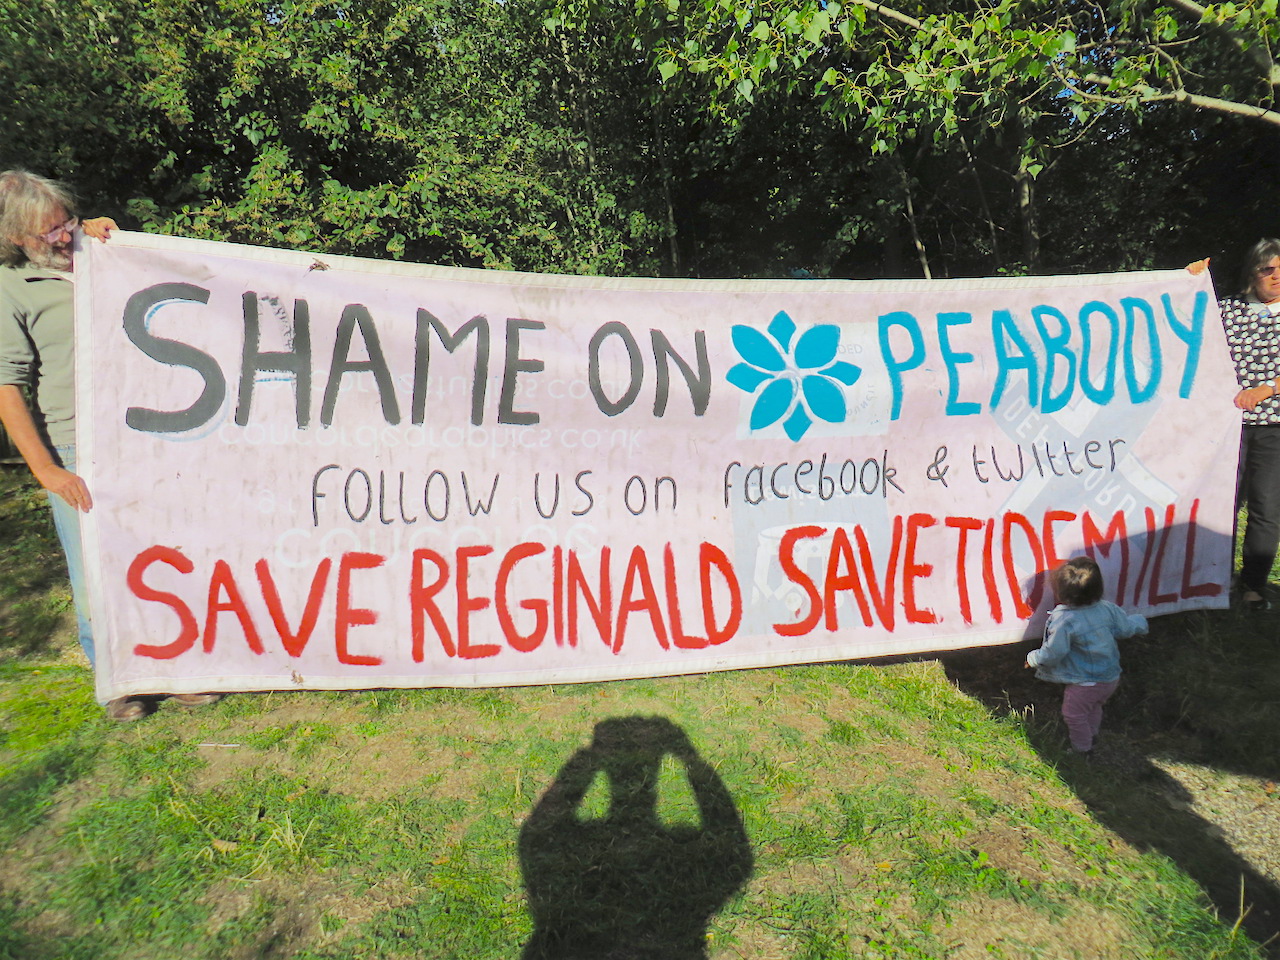 'Shame on Peabody': a banner held by campaigners in the Old Tidemill Wildlife Garden in Deptford, which has been occupied since August 29, 2018 to prevent Lewisham Council and Peabody from destroying it - and 16 structurally sound council flats next door - as part of a housing project (Photo: Andy Worthington).